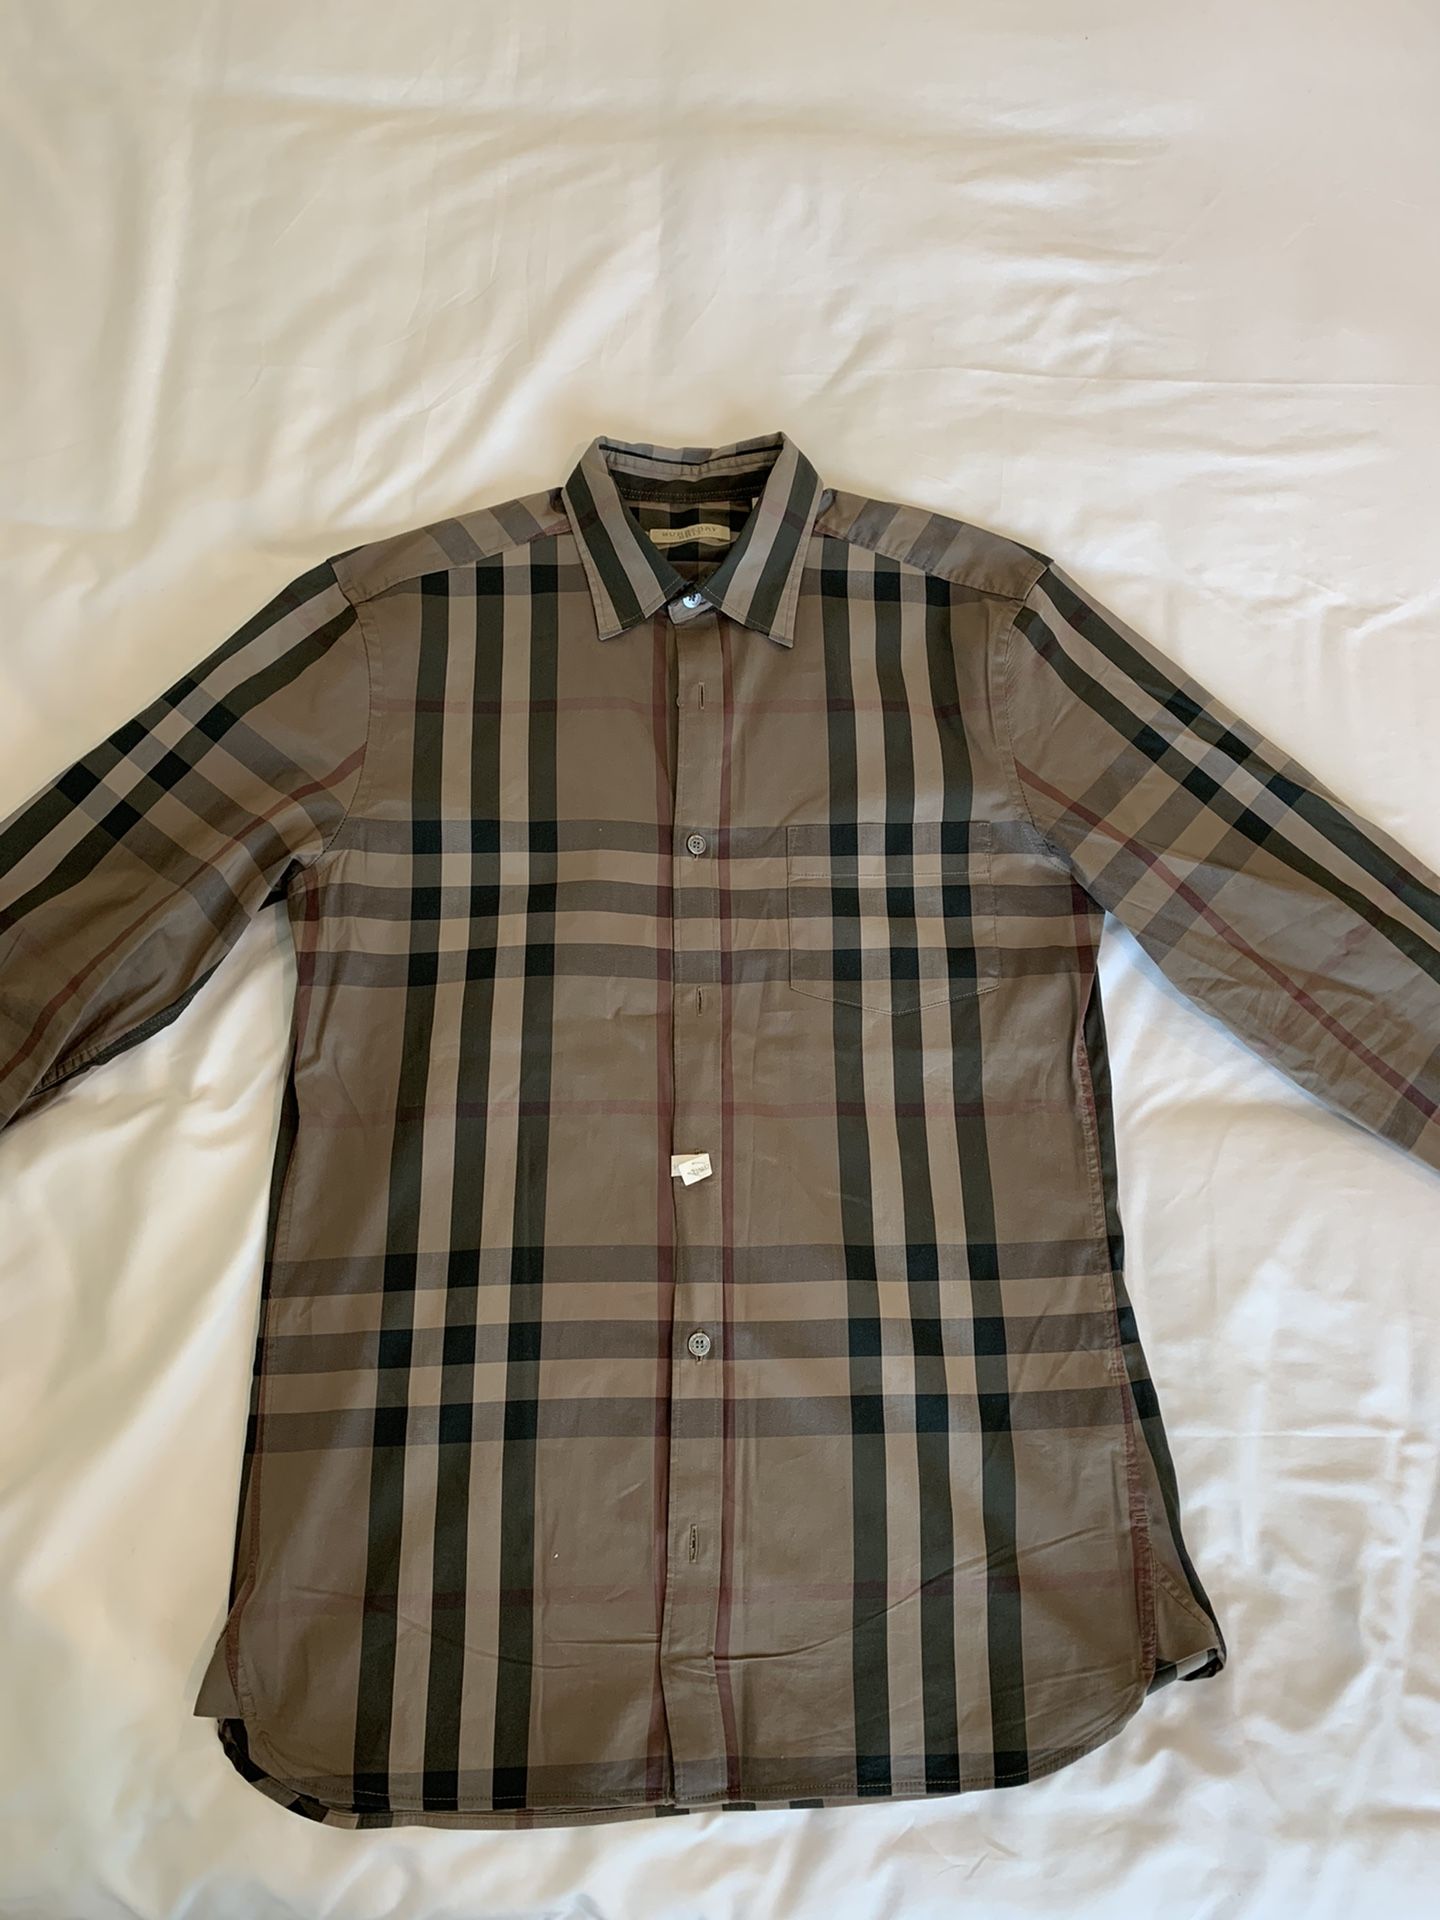 Authentic Burberry shirt